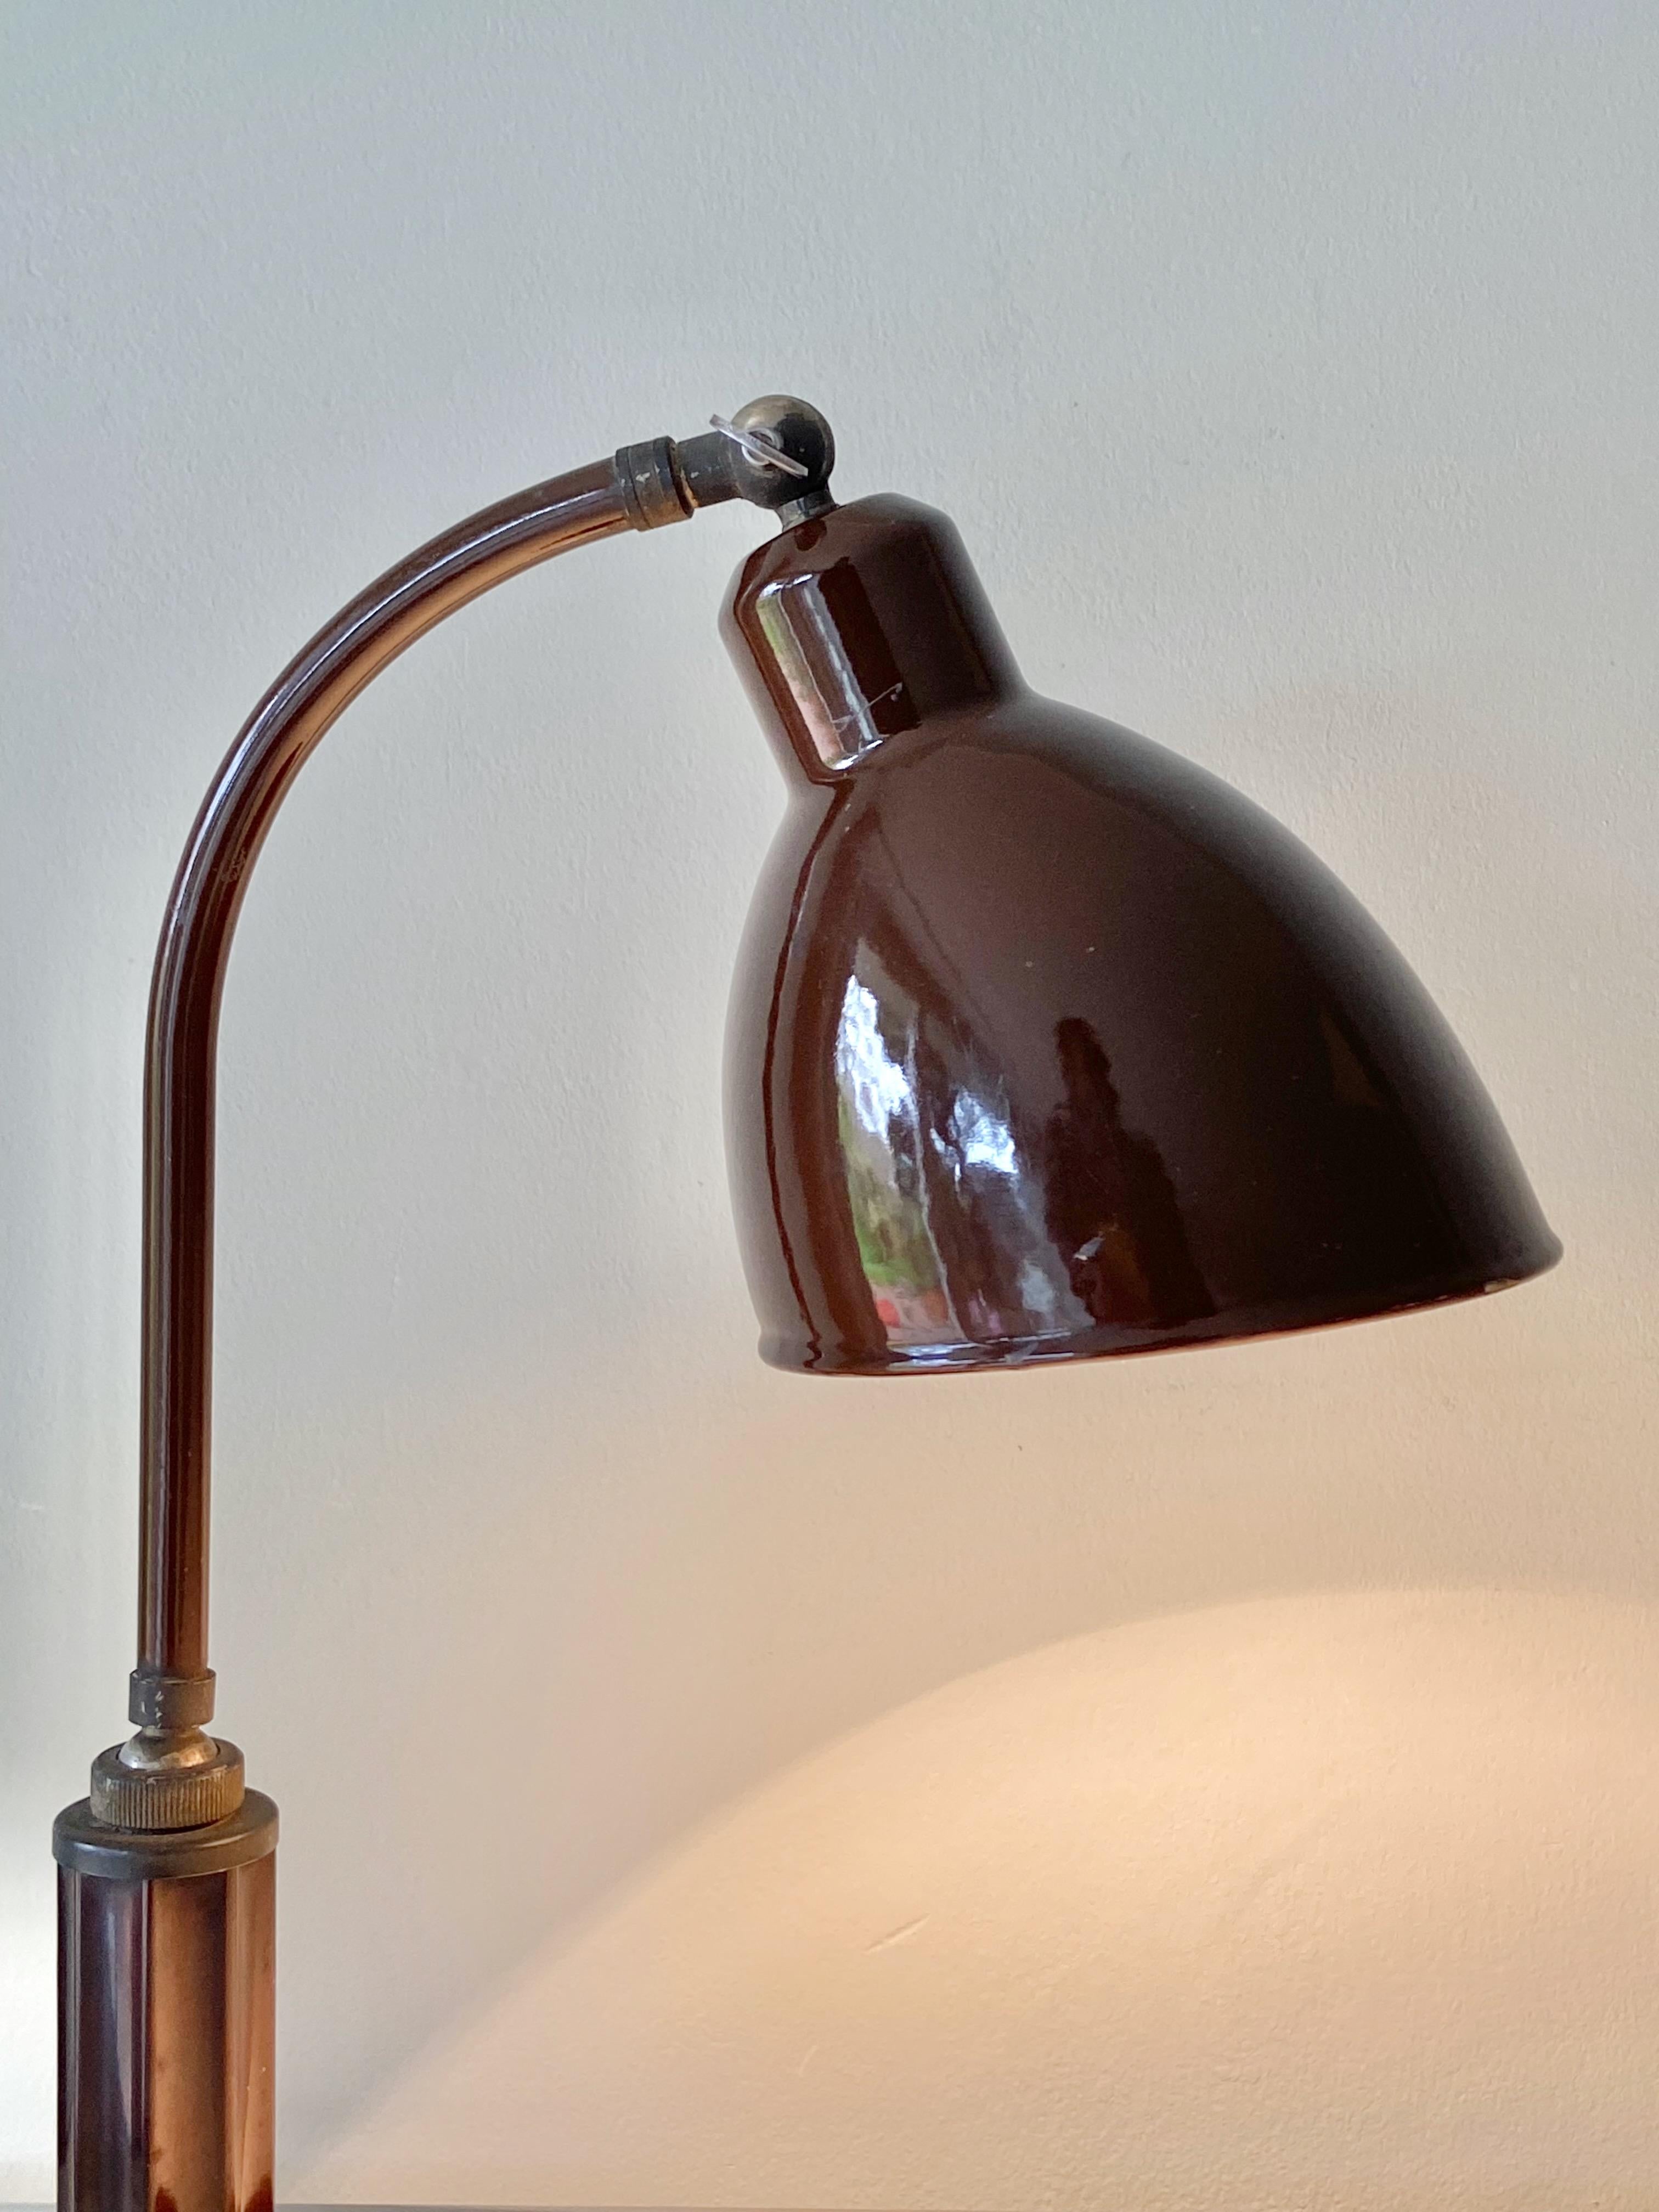 German Molitor Grapholux Lamp Brown Enamel and Bakelite Stick by Christian Dell 1930s For Sale